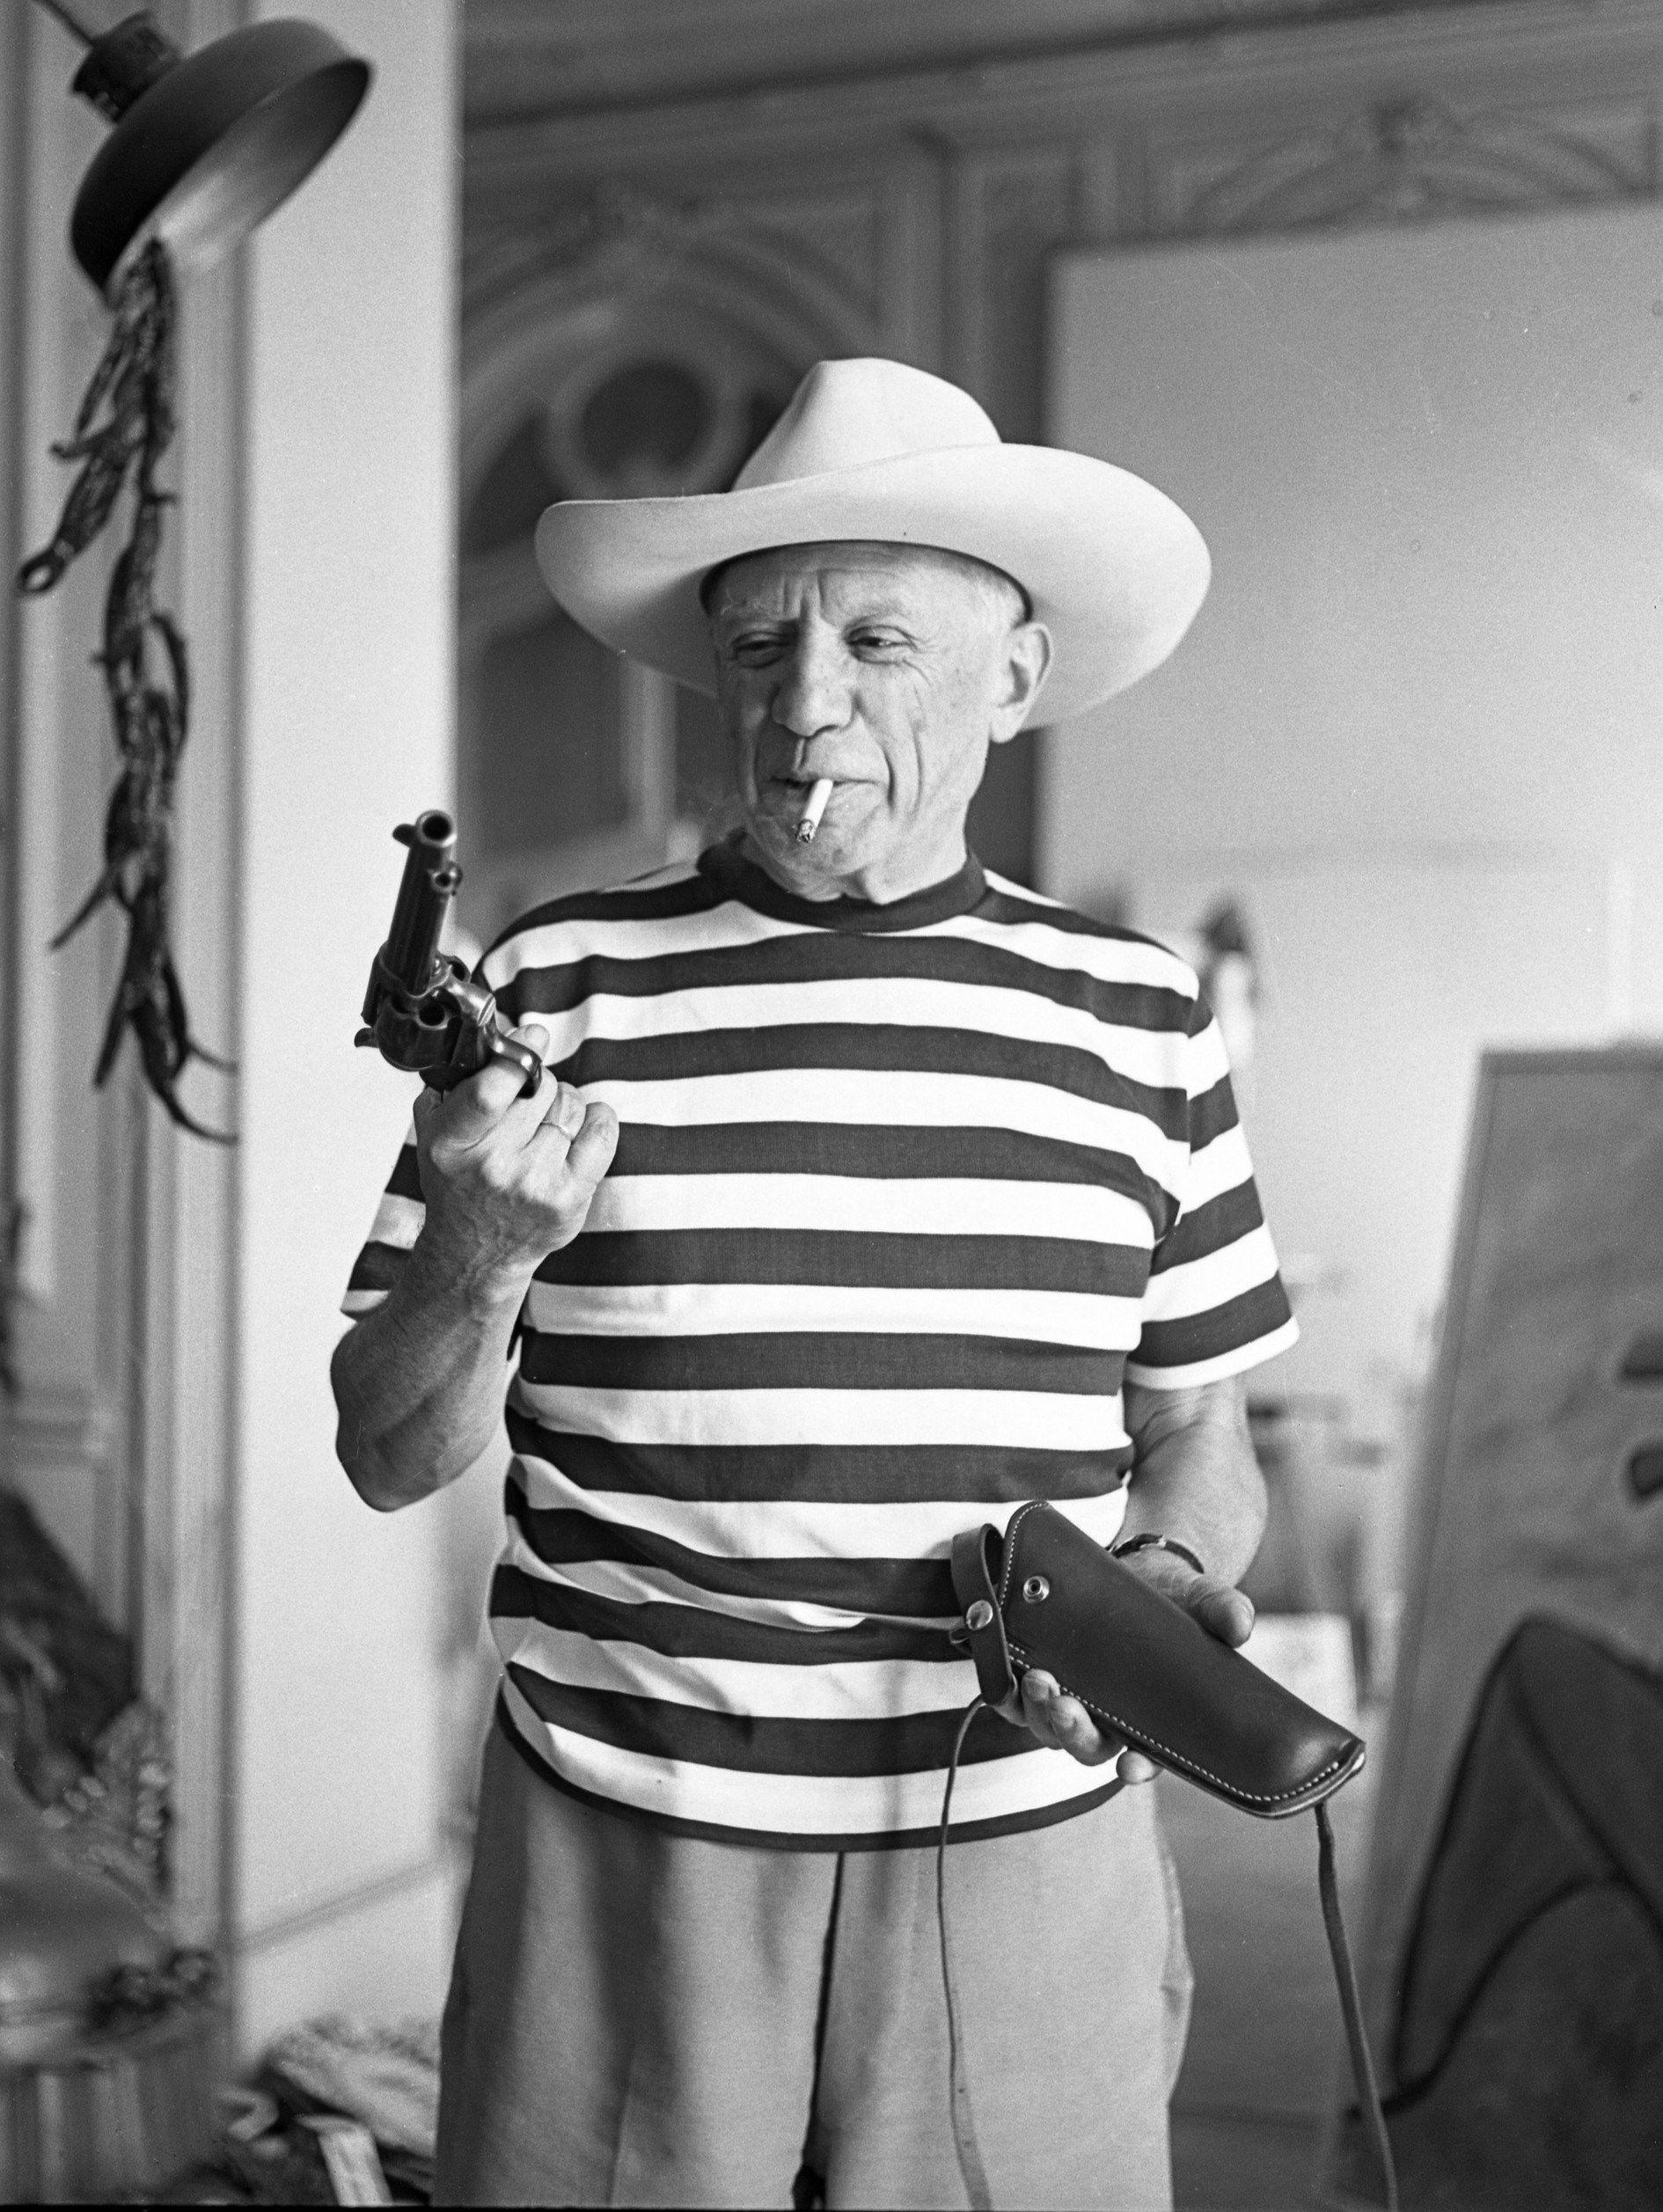 Pablo Picasso. Known people people news and biographies